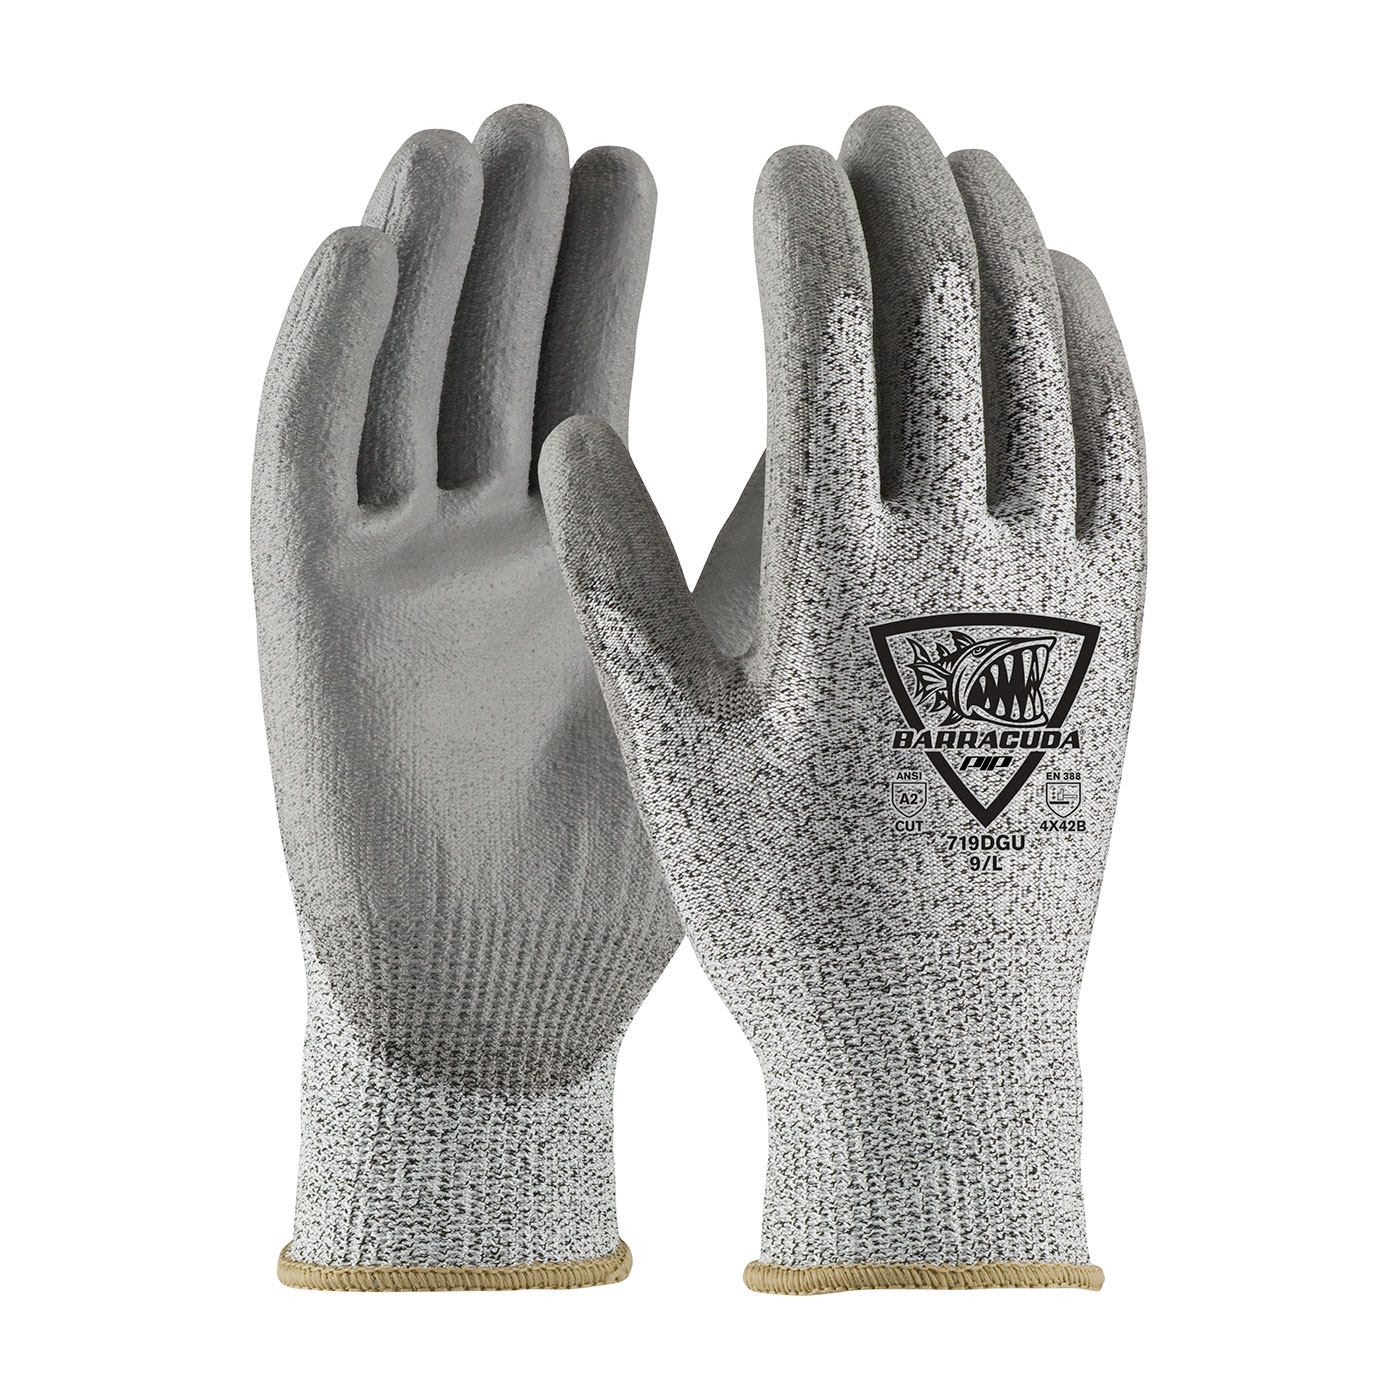 Barracuda® Seamless Knit HPPE Blended Glove with Polyurethane Coated Flat Grip on Palm & Fingers